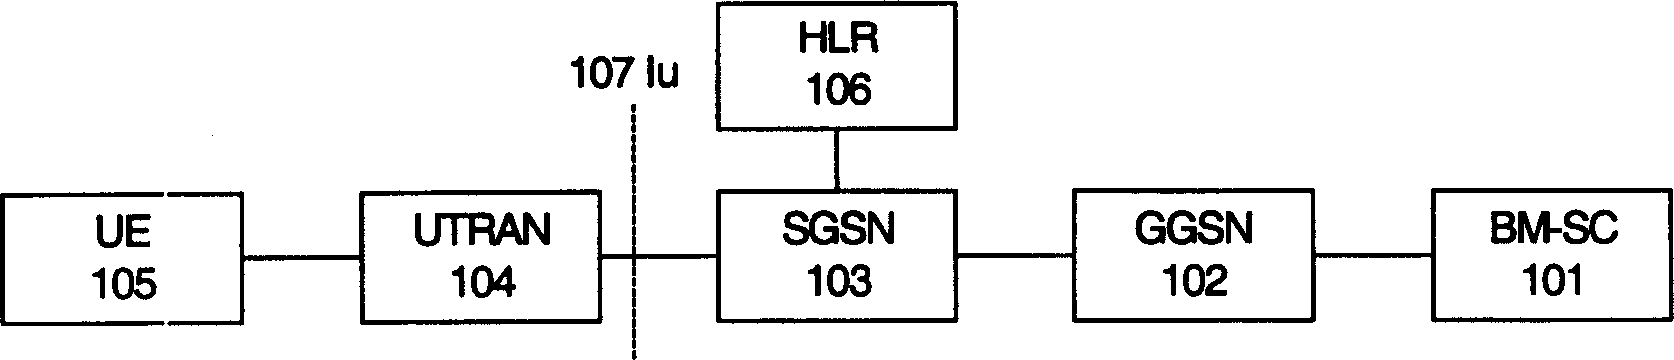 Method for supporting services in multimedia broadcast and multicast by sharing Lu signaling connection